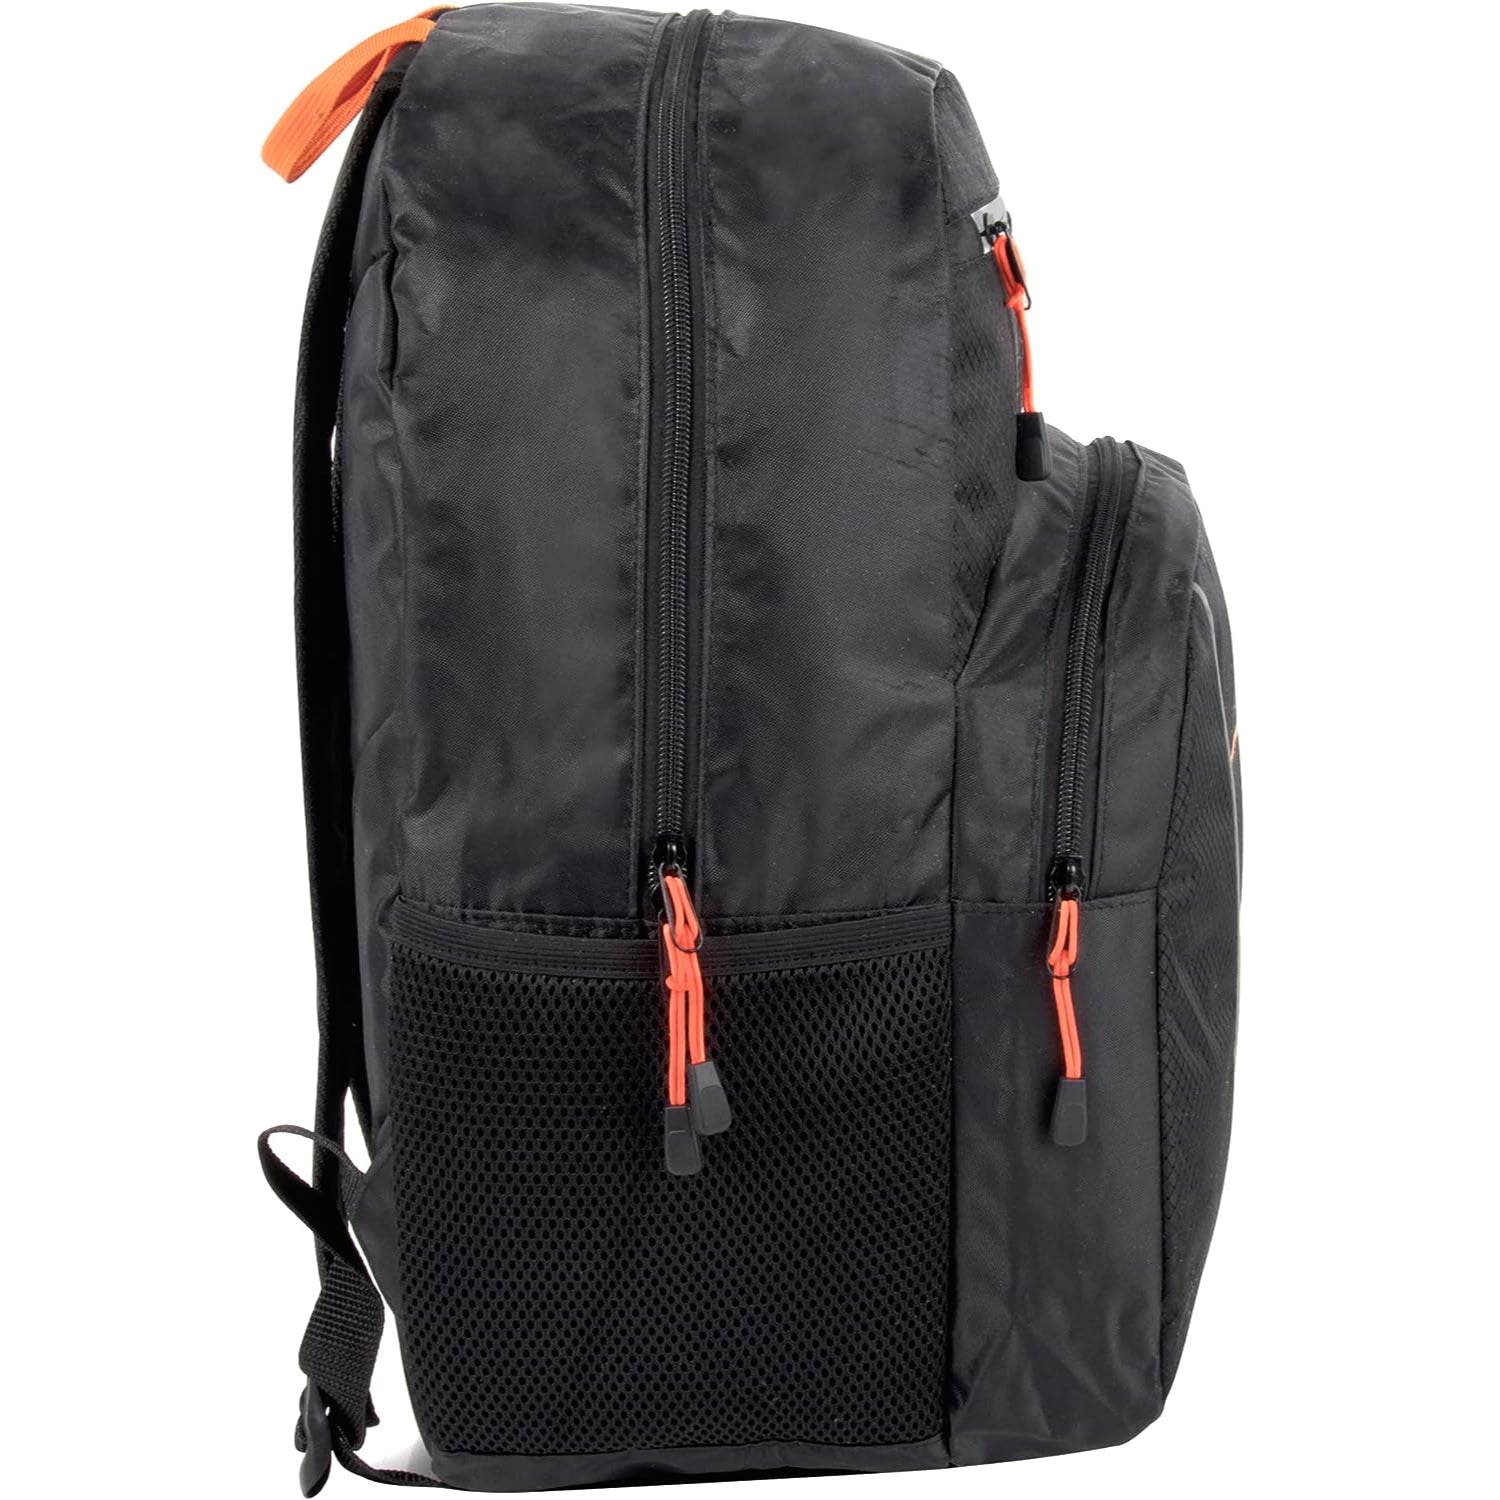 AD Sutton Summit Ridge Backpack With 17'' Laptop Pocket, Black